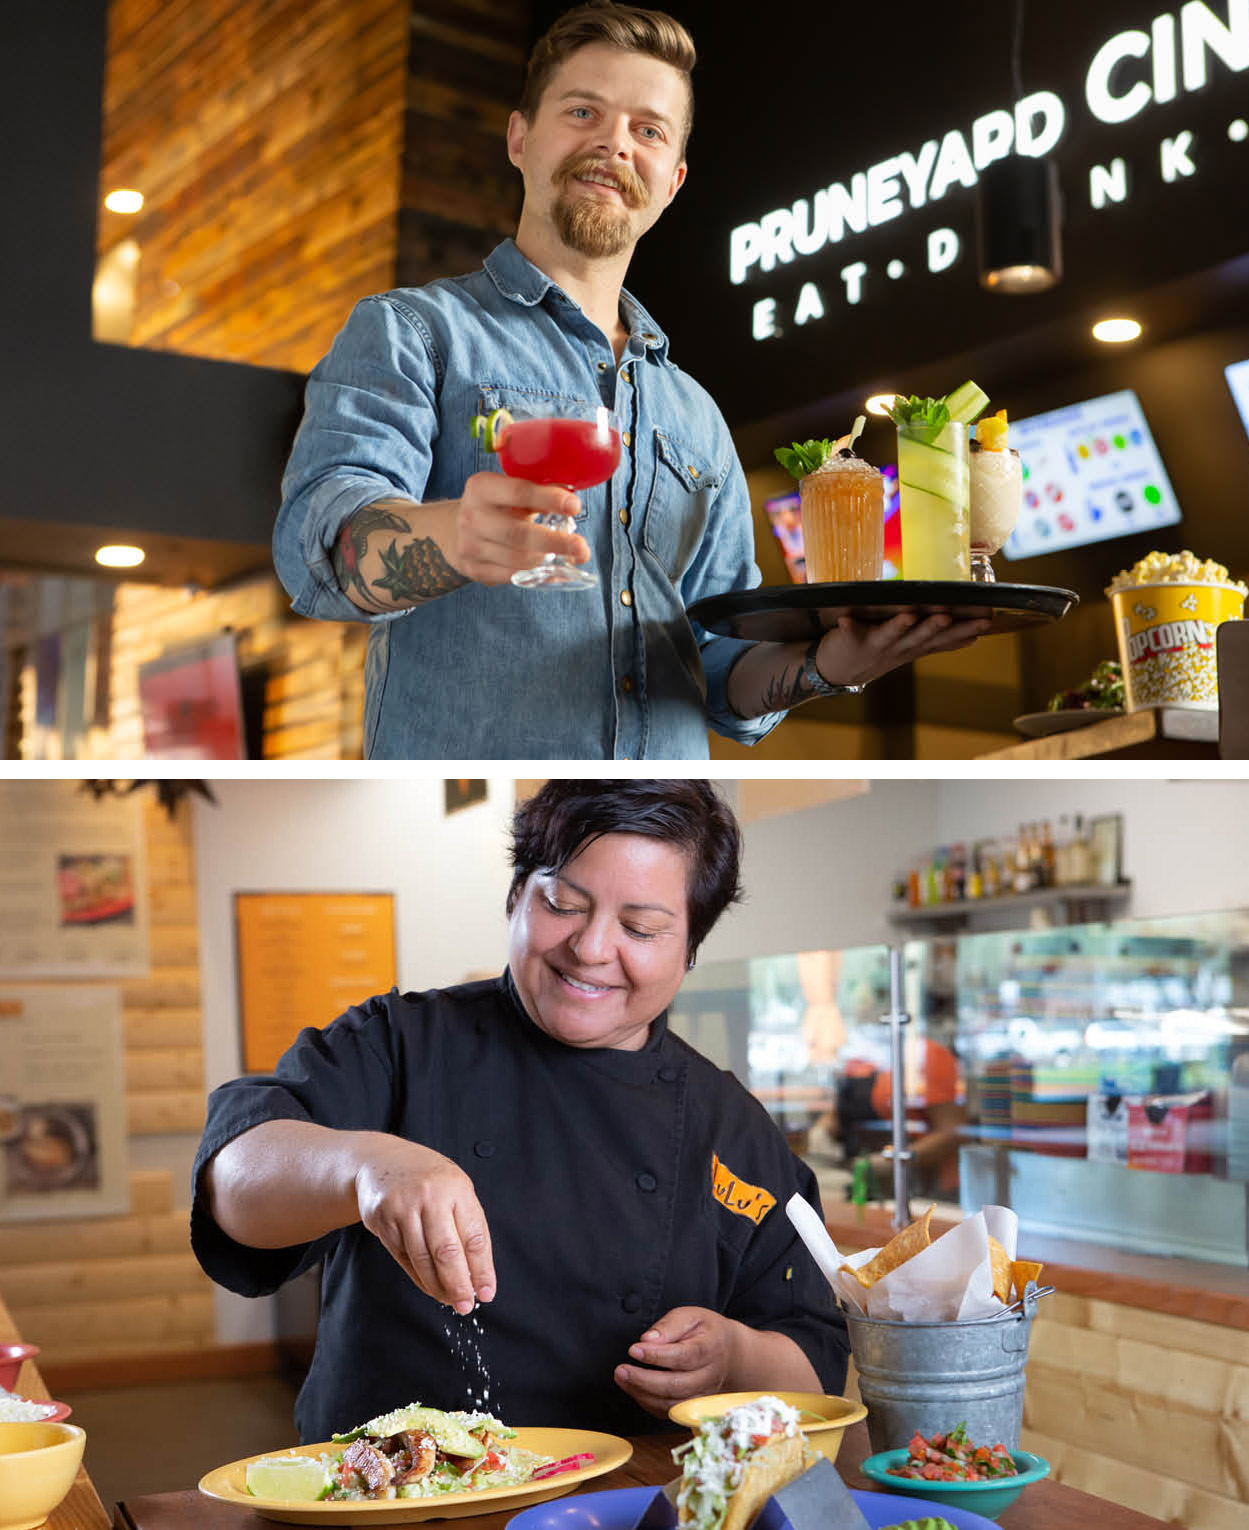 Image of bartender on top with a drink and chef on bottom preparing food.